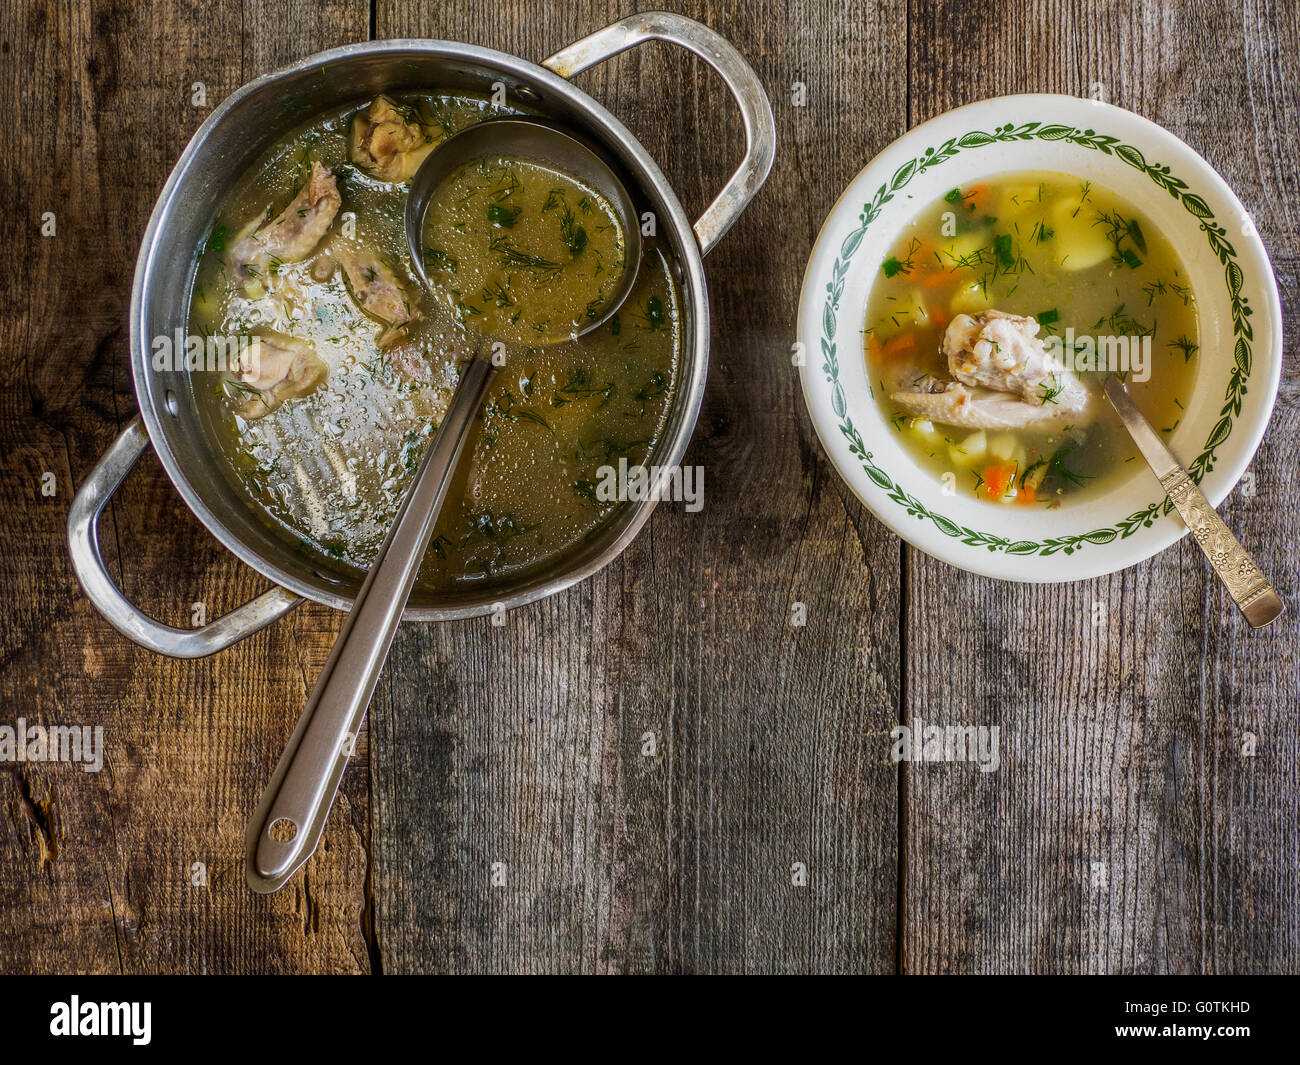 Saucepan and bowl of chicken soup on wooden table Stock Photo